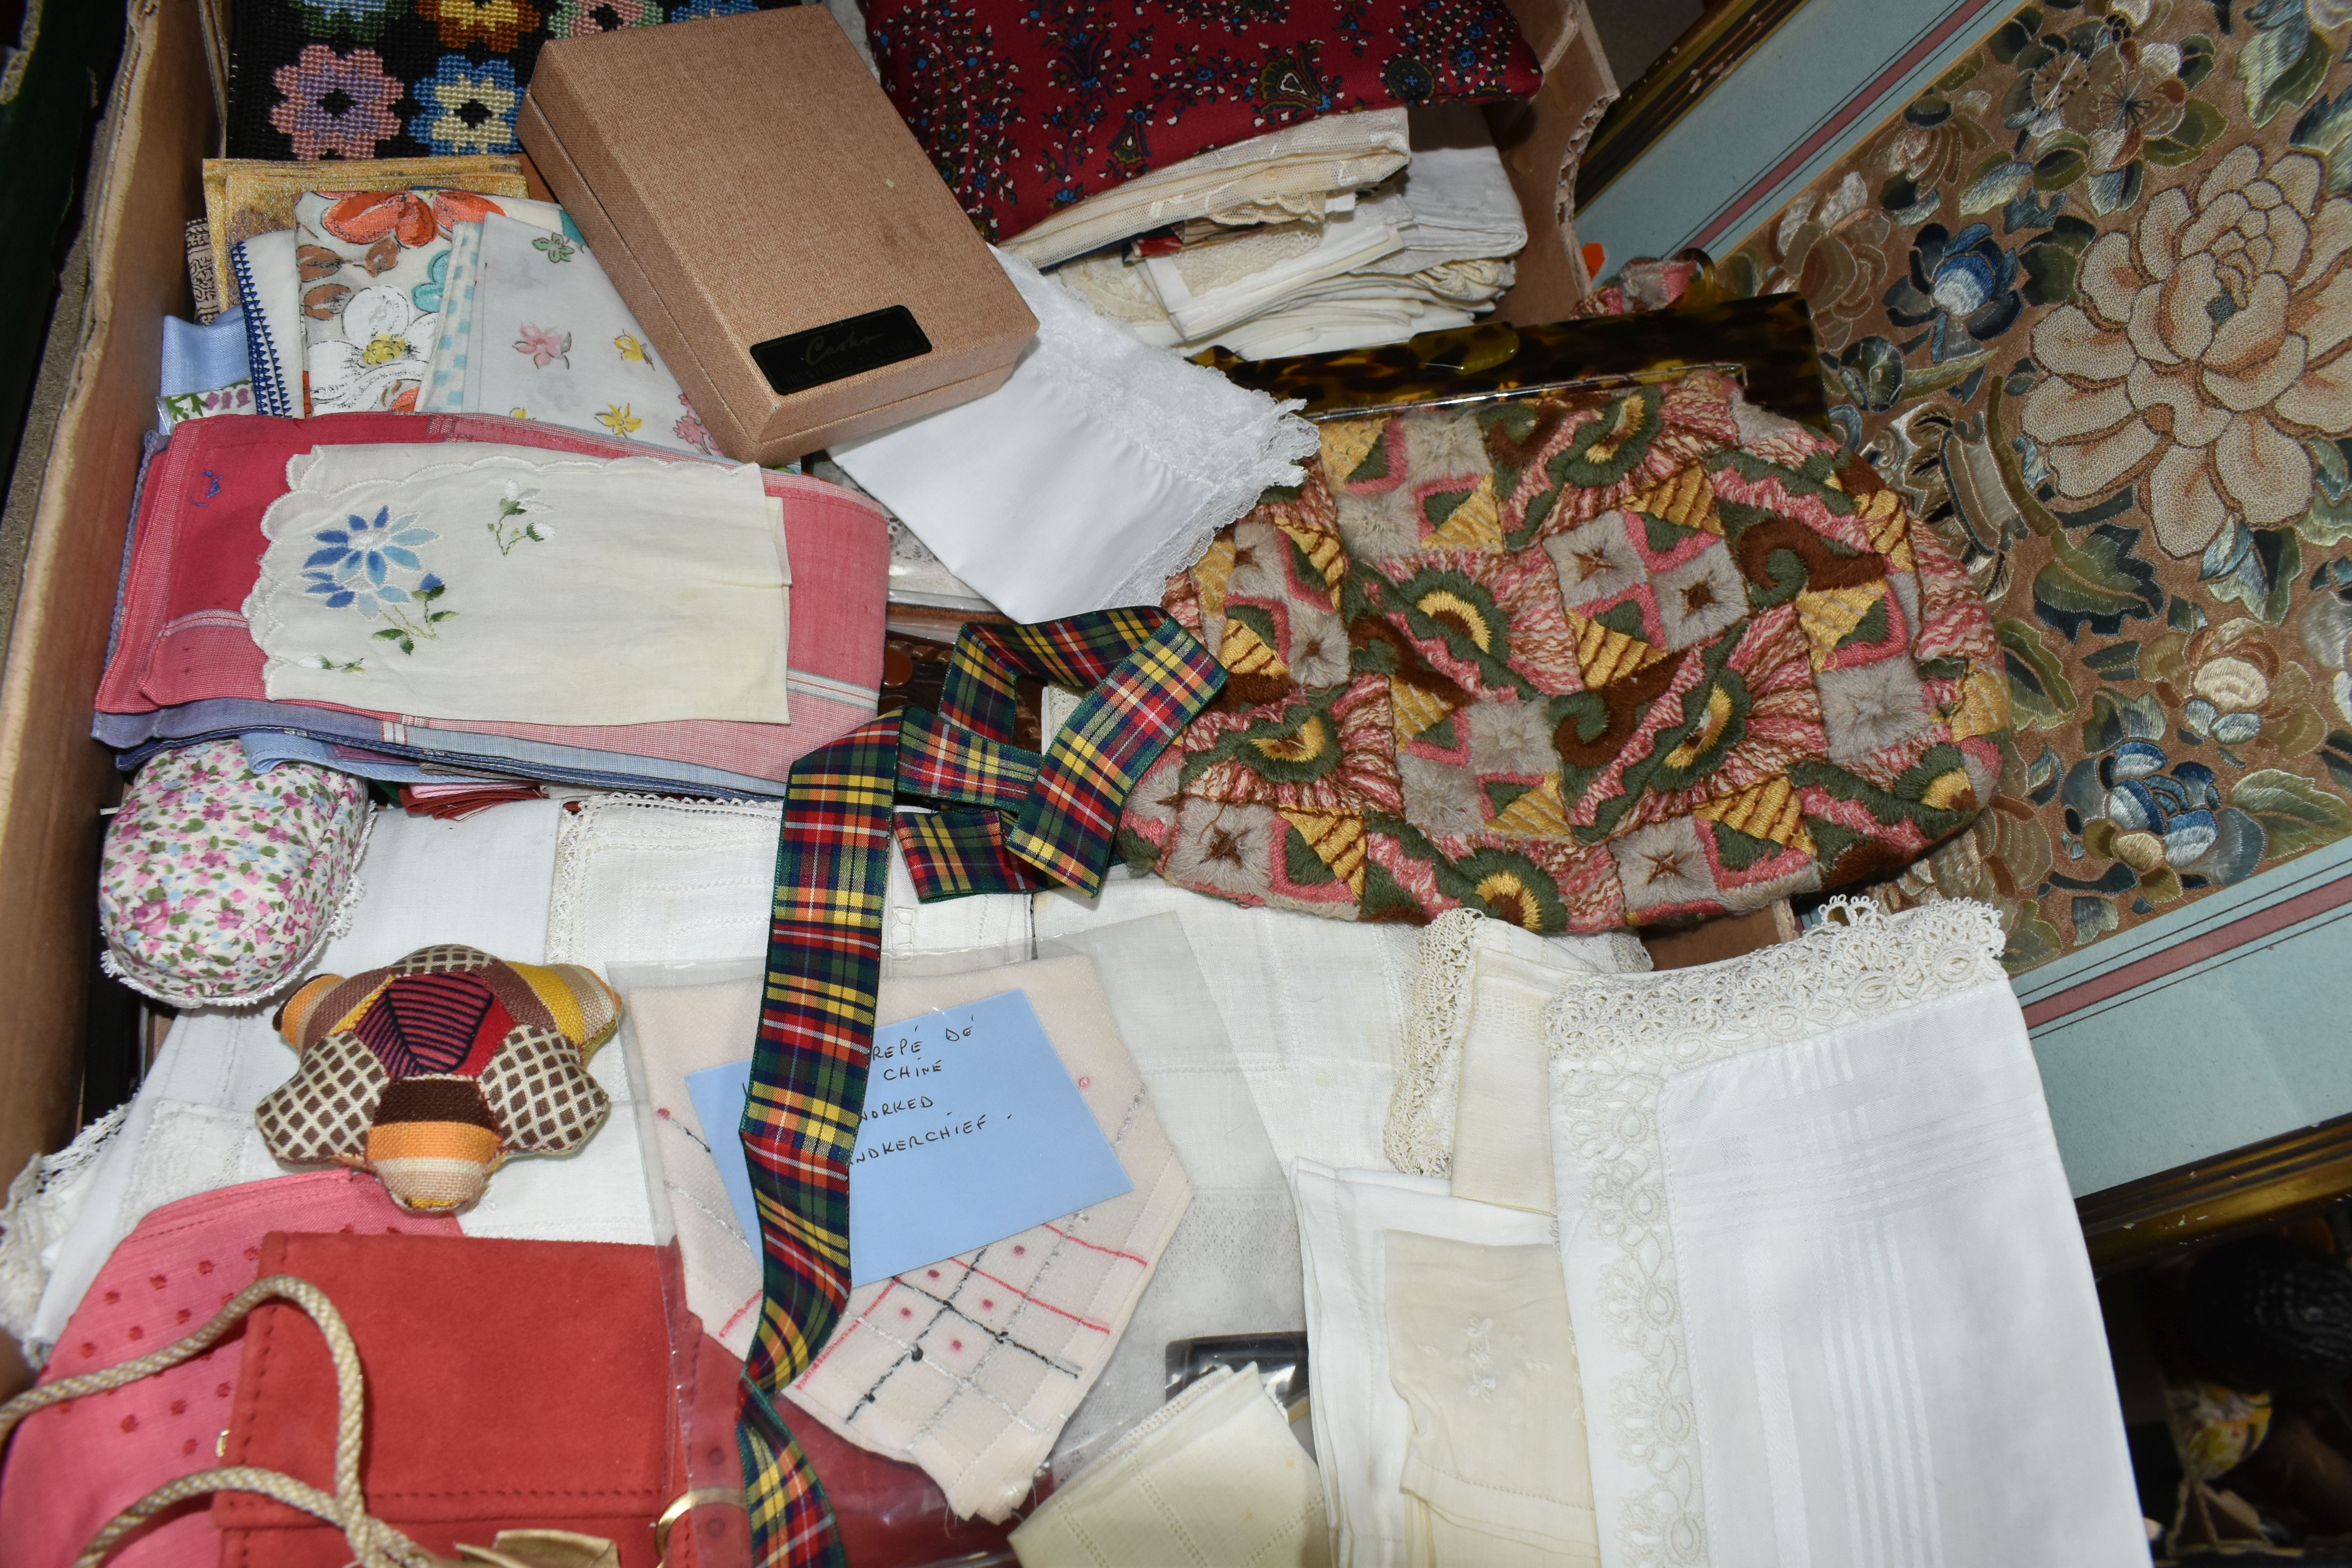 ONE BOX OF VINTAGE HANDKERCHIEFS, EMBROIDERY KITS, AND SNAKE SKIN HANDBAGS, with a large - Image 6 of 6